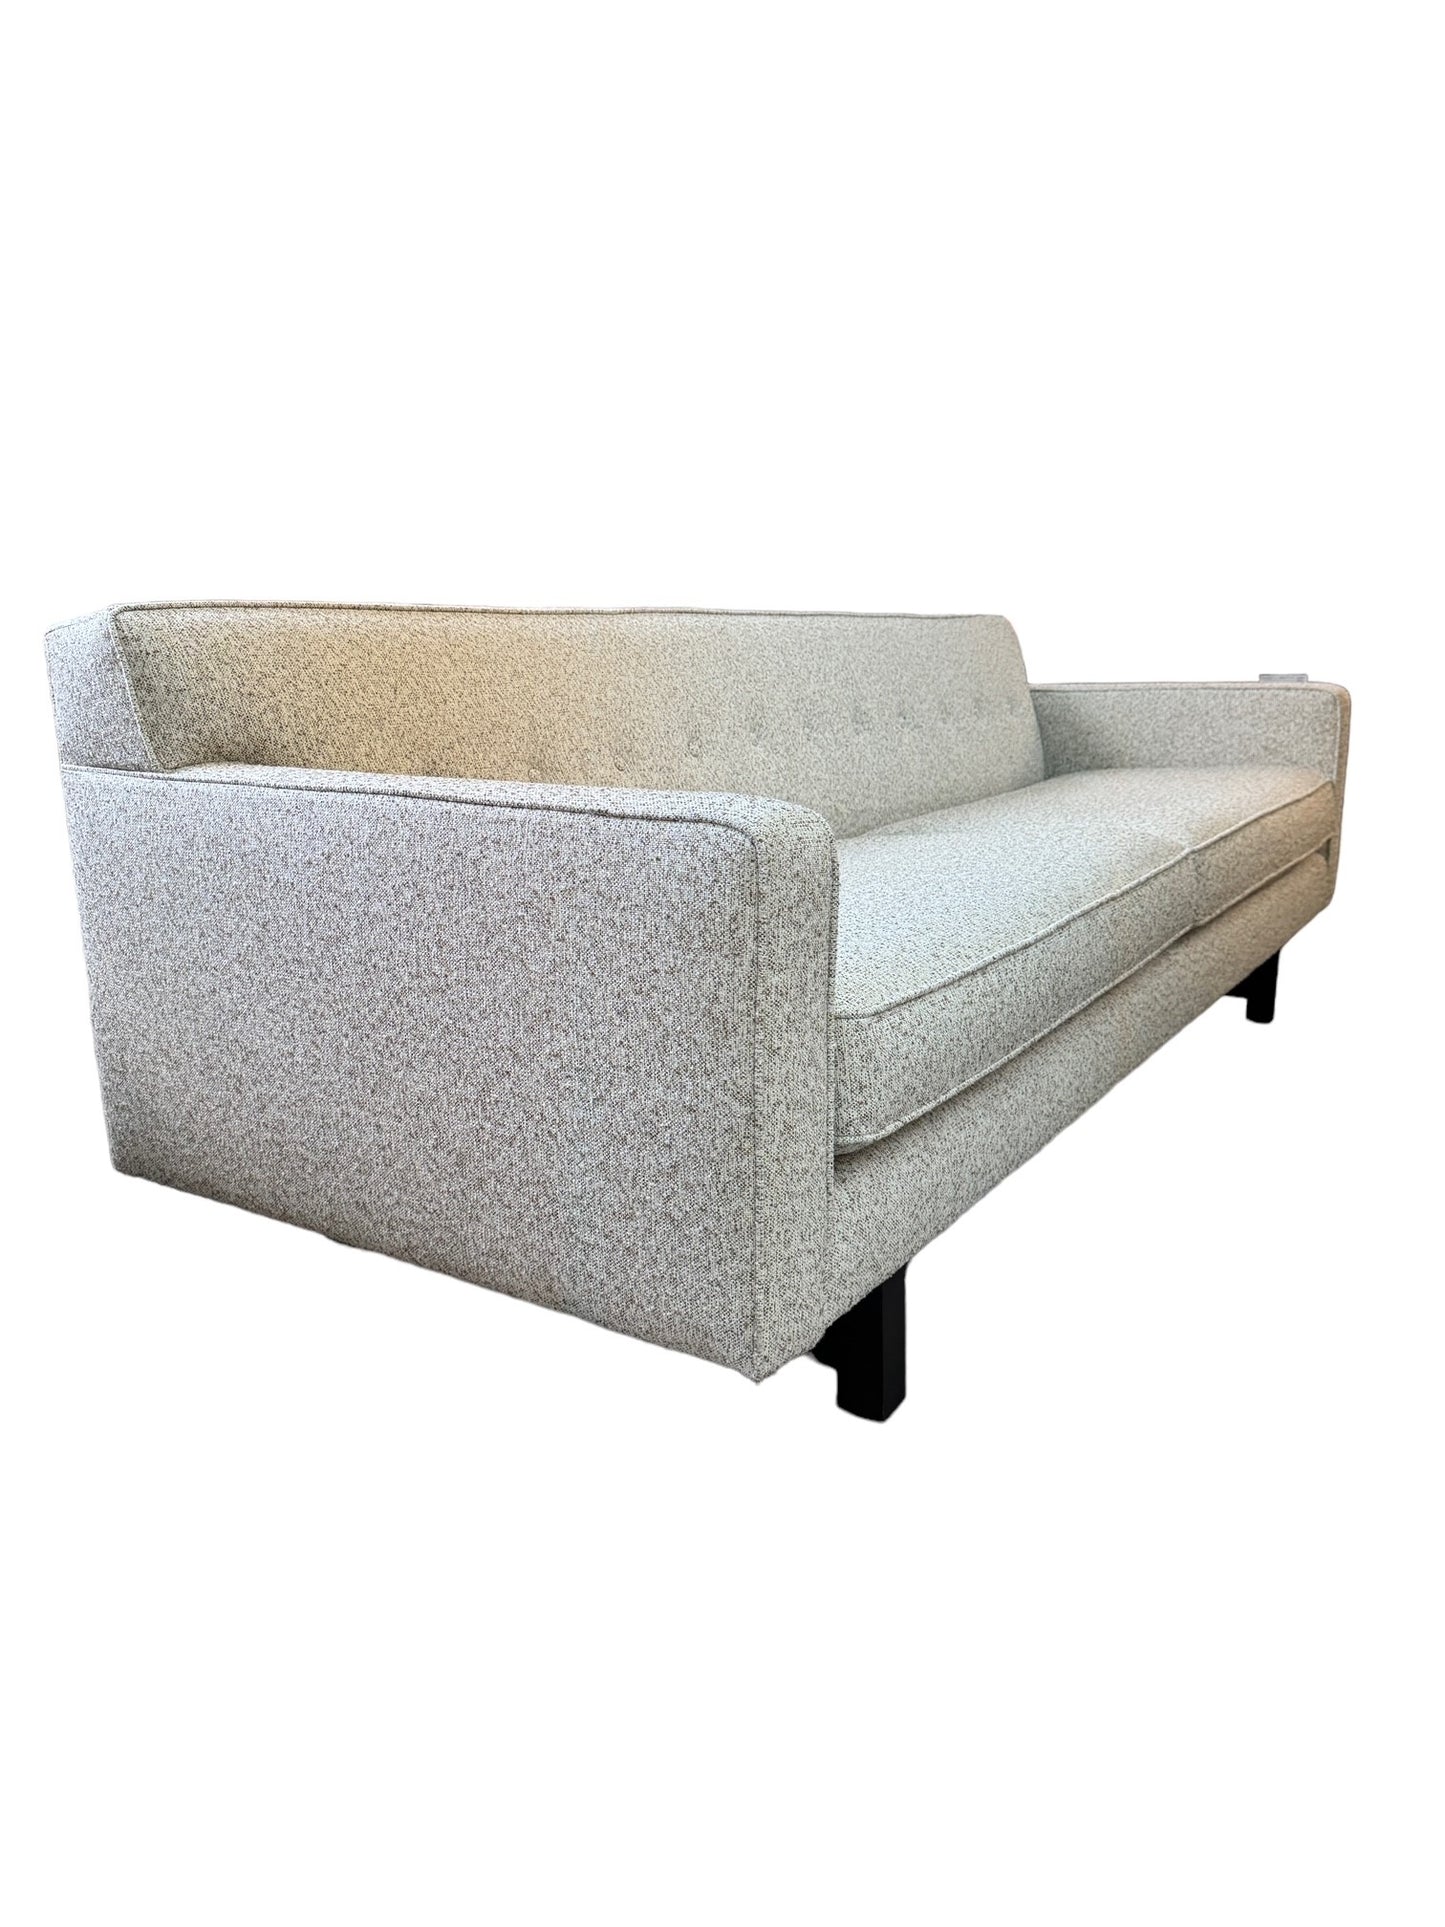 Room and Board Andre Upholstered Contemporary Sofa Couch EK221-168